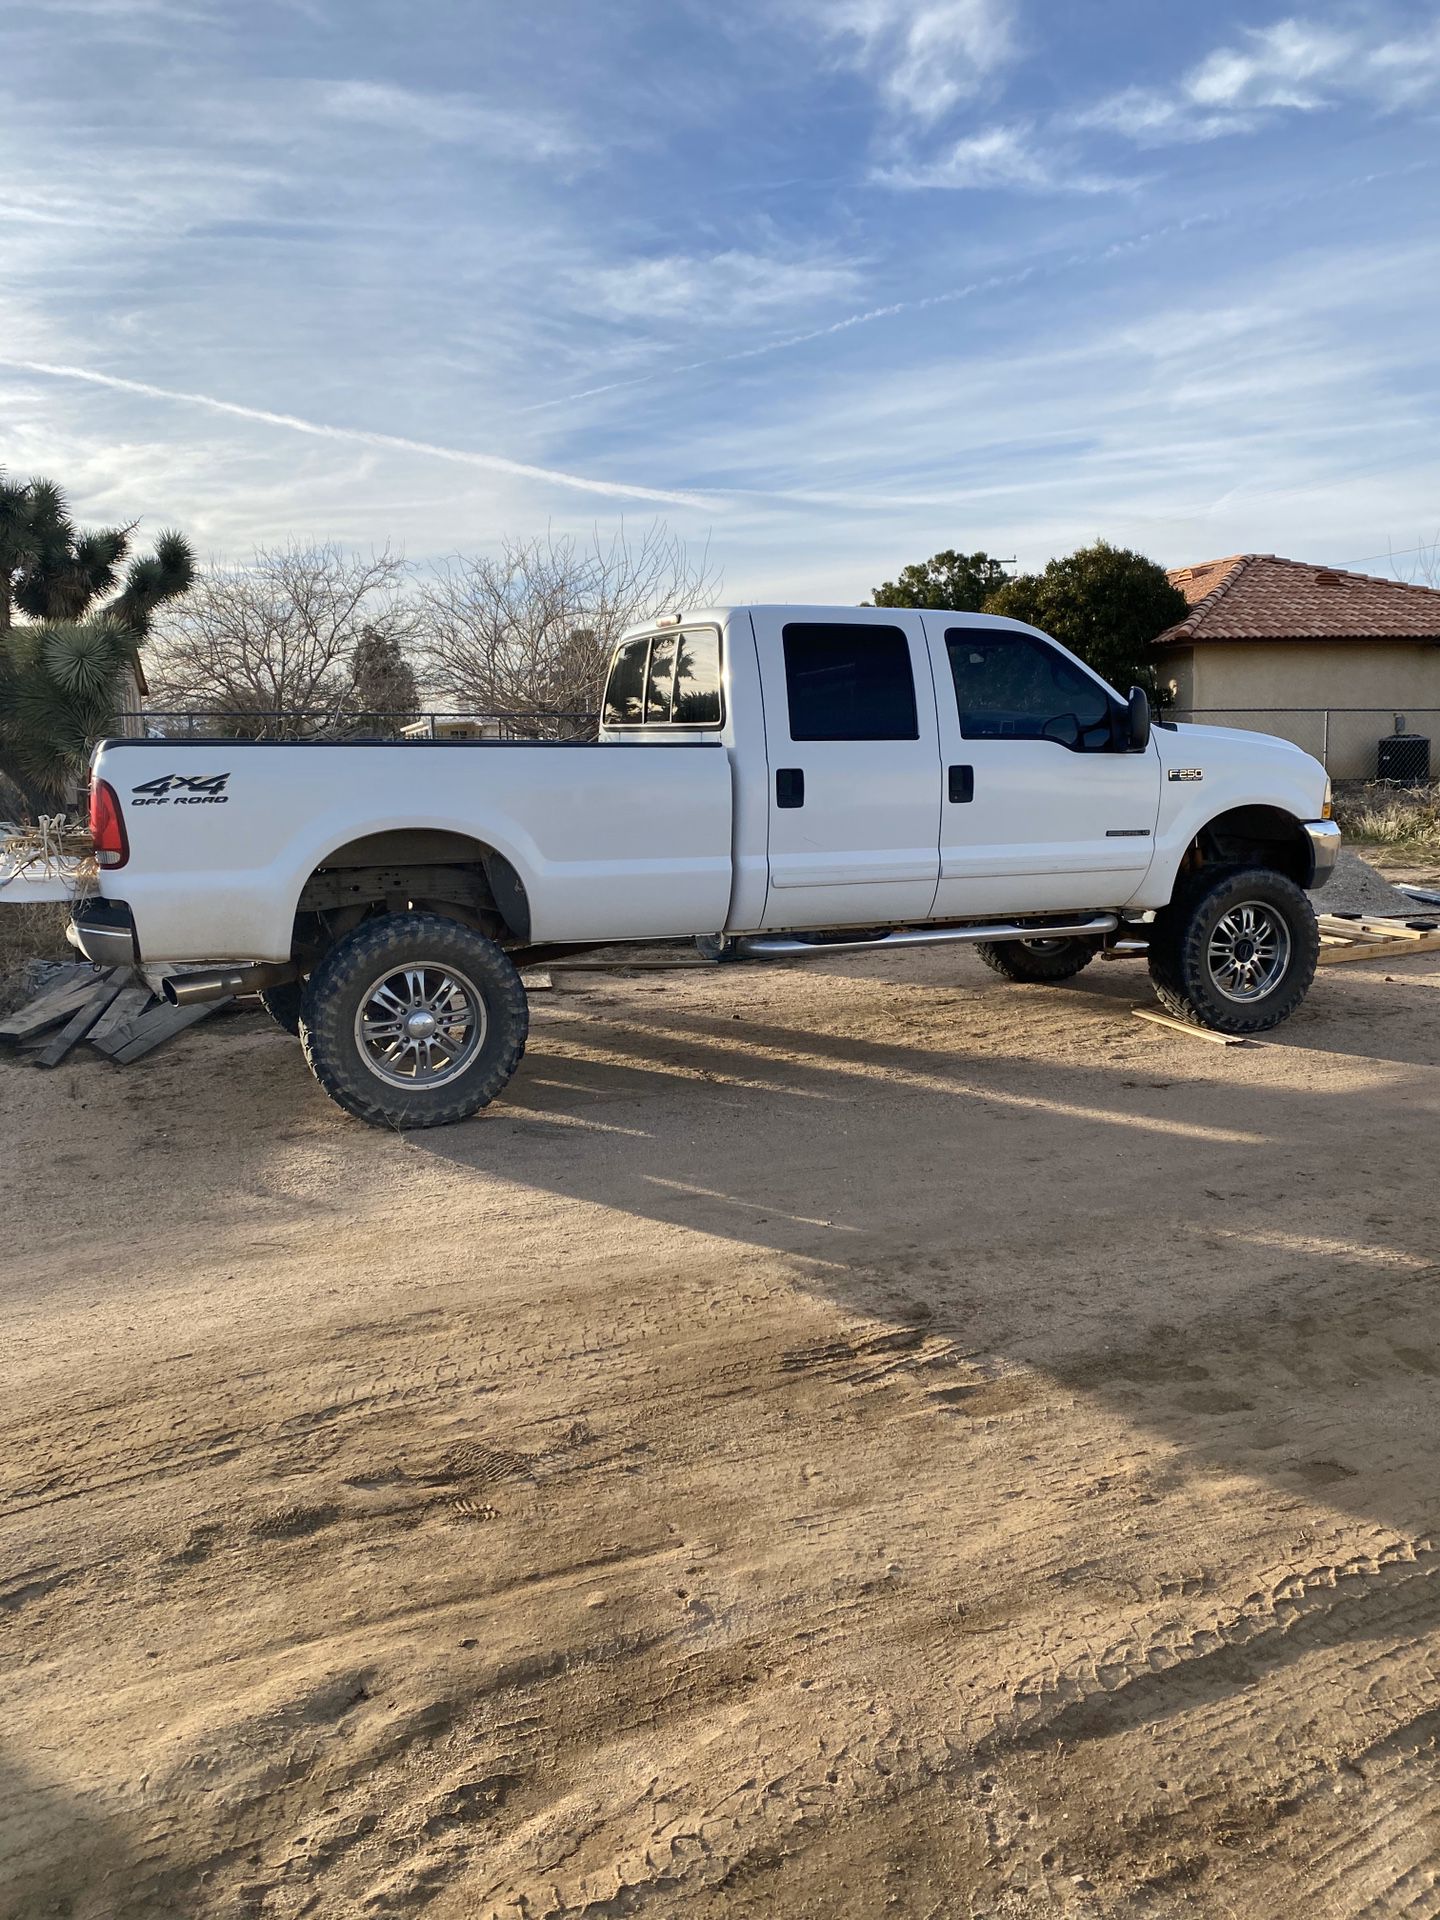 2002 Ford F250 diesel 7.3 engine crew cab long bed 180,000 miles 4 wheel drive 4x4